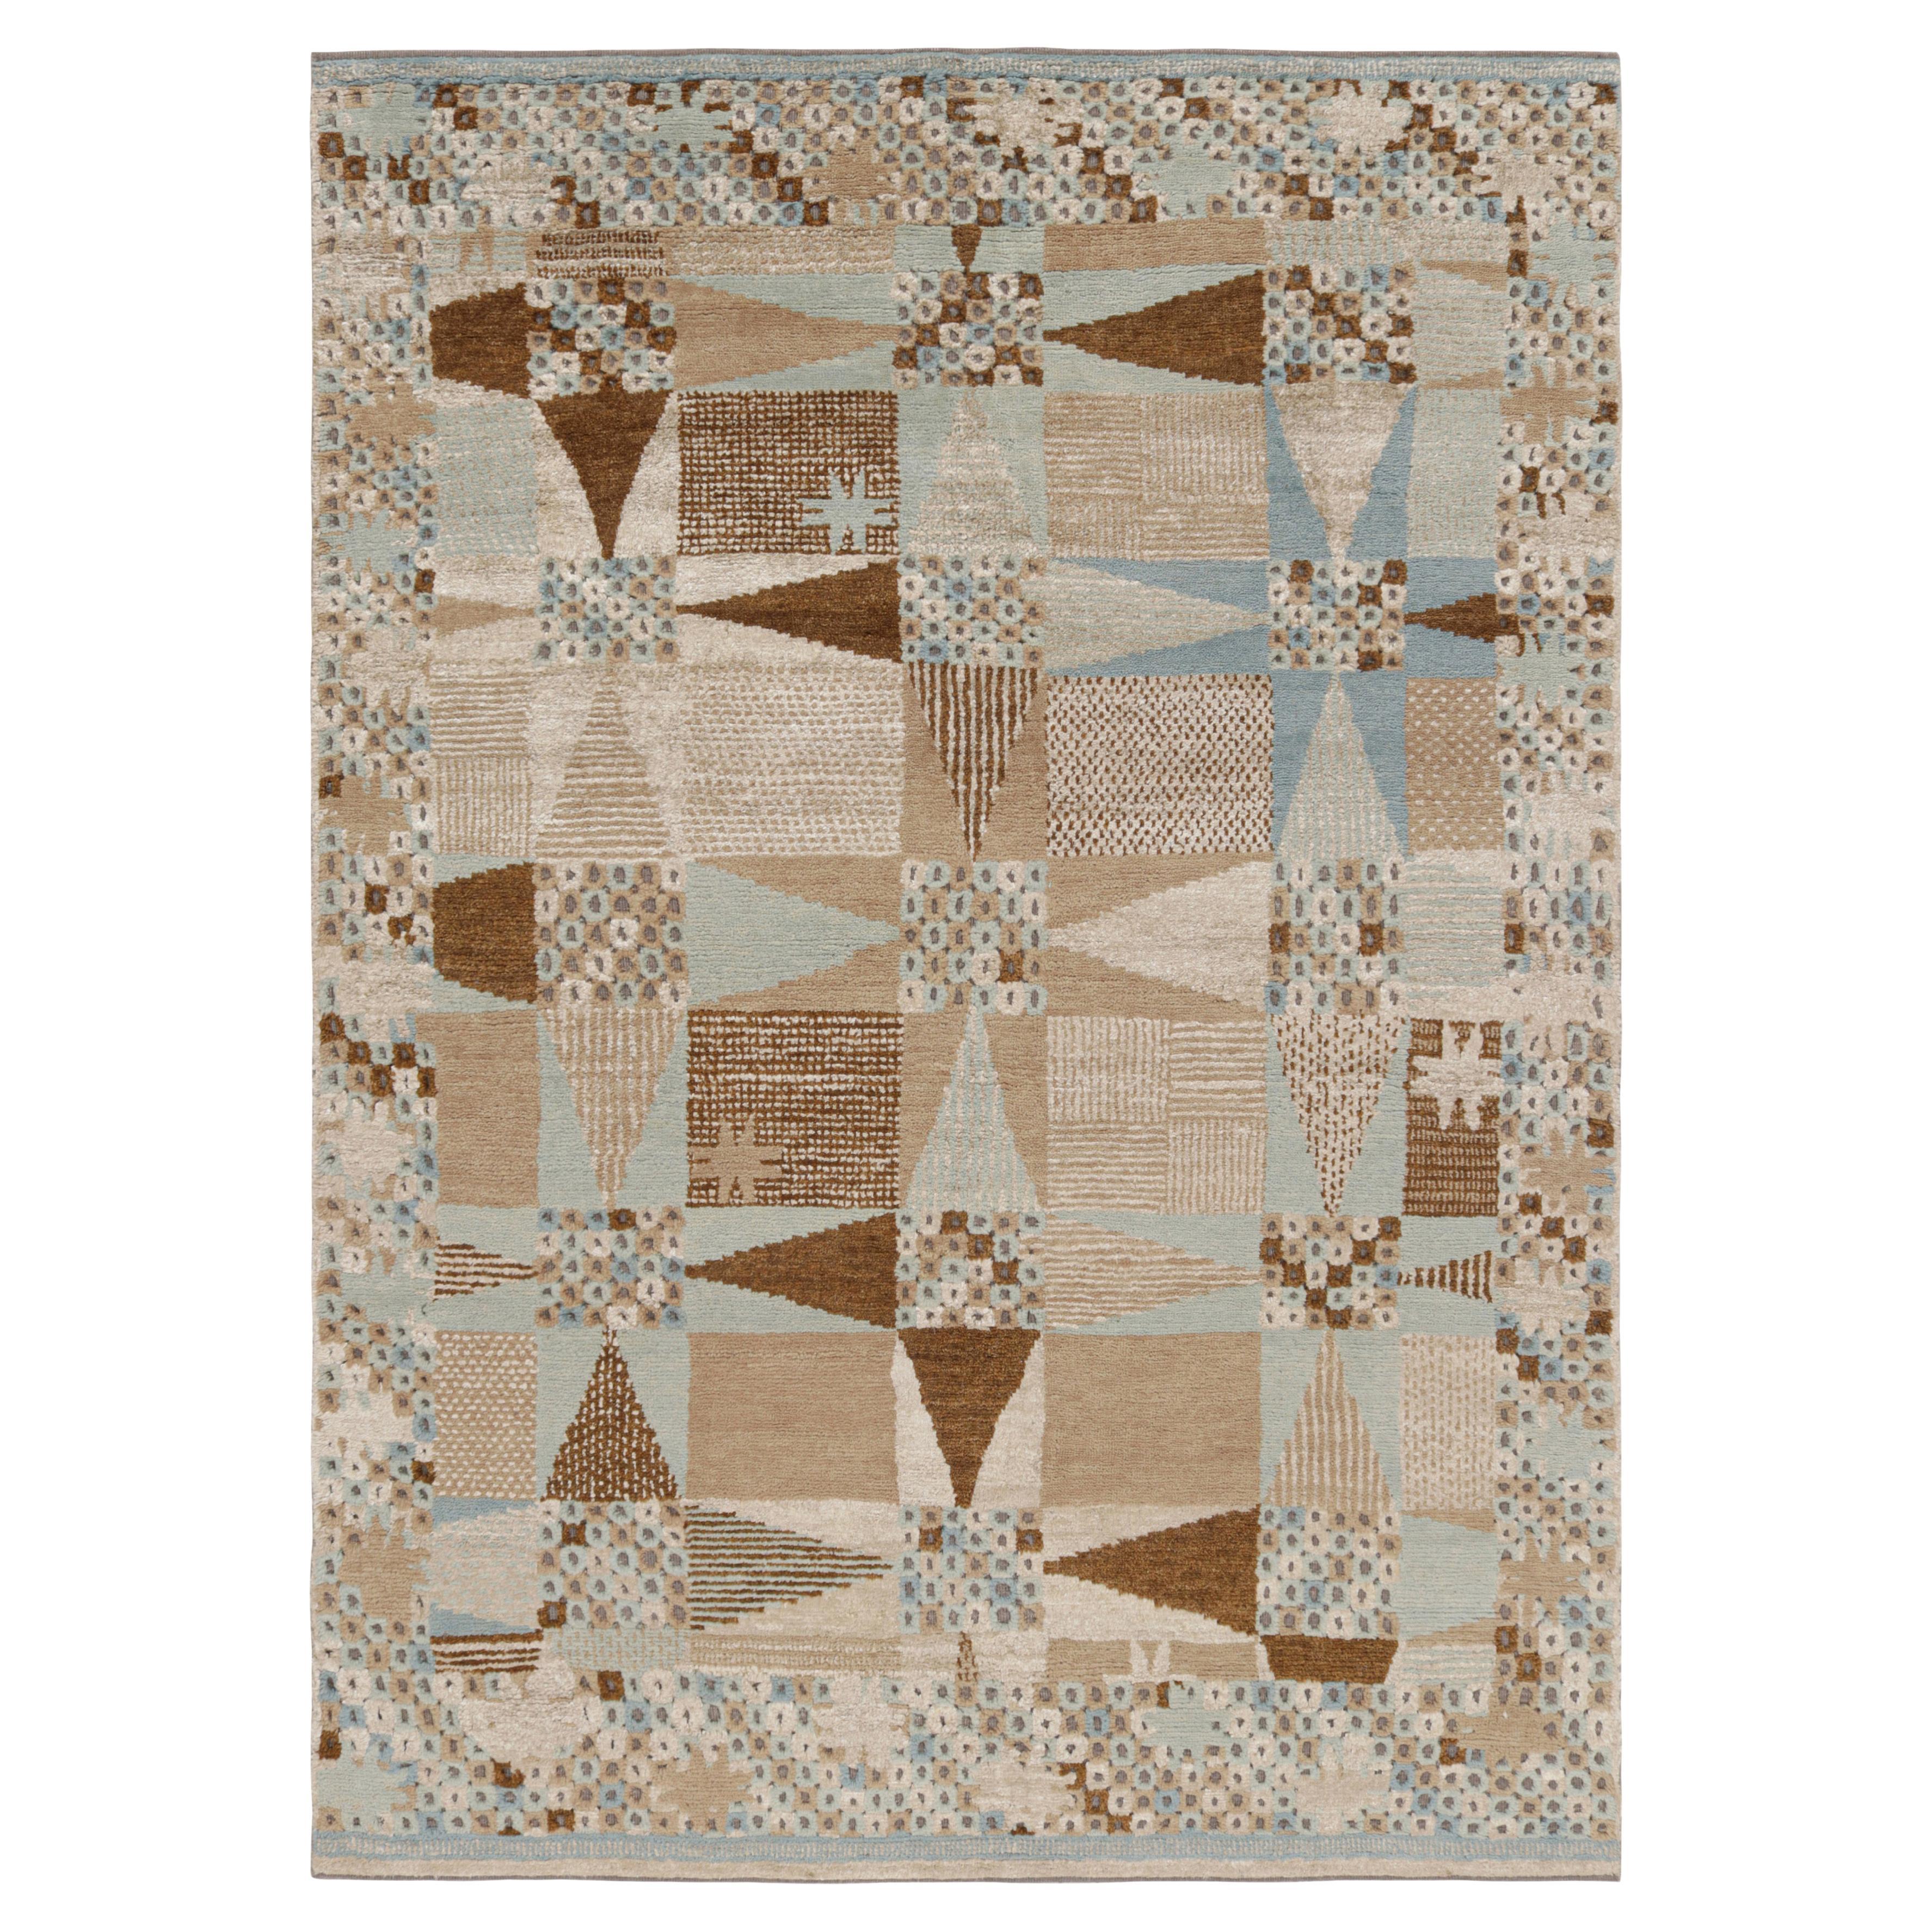 Rug & Kilim’s Scandinavian Style Rug in Beige-Brown and Blue Geometric Patterns For Sale